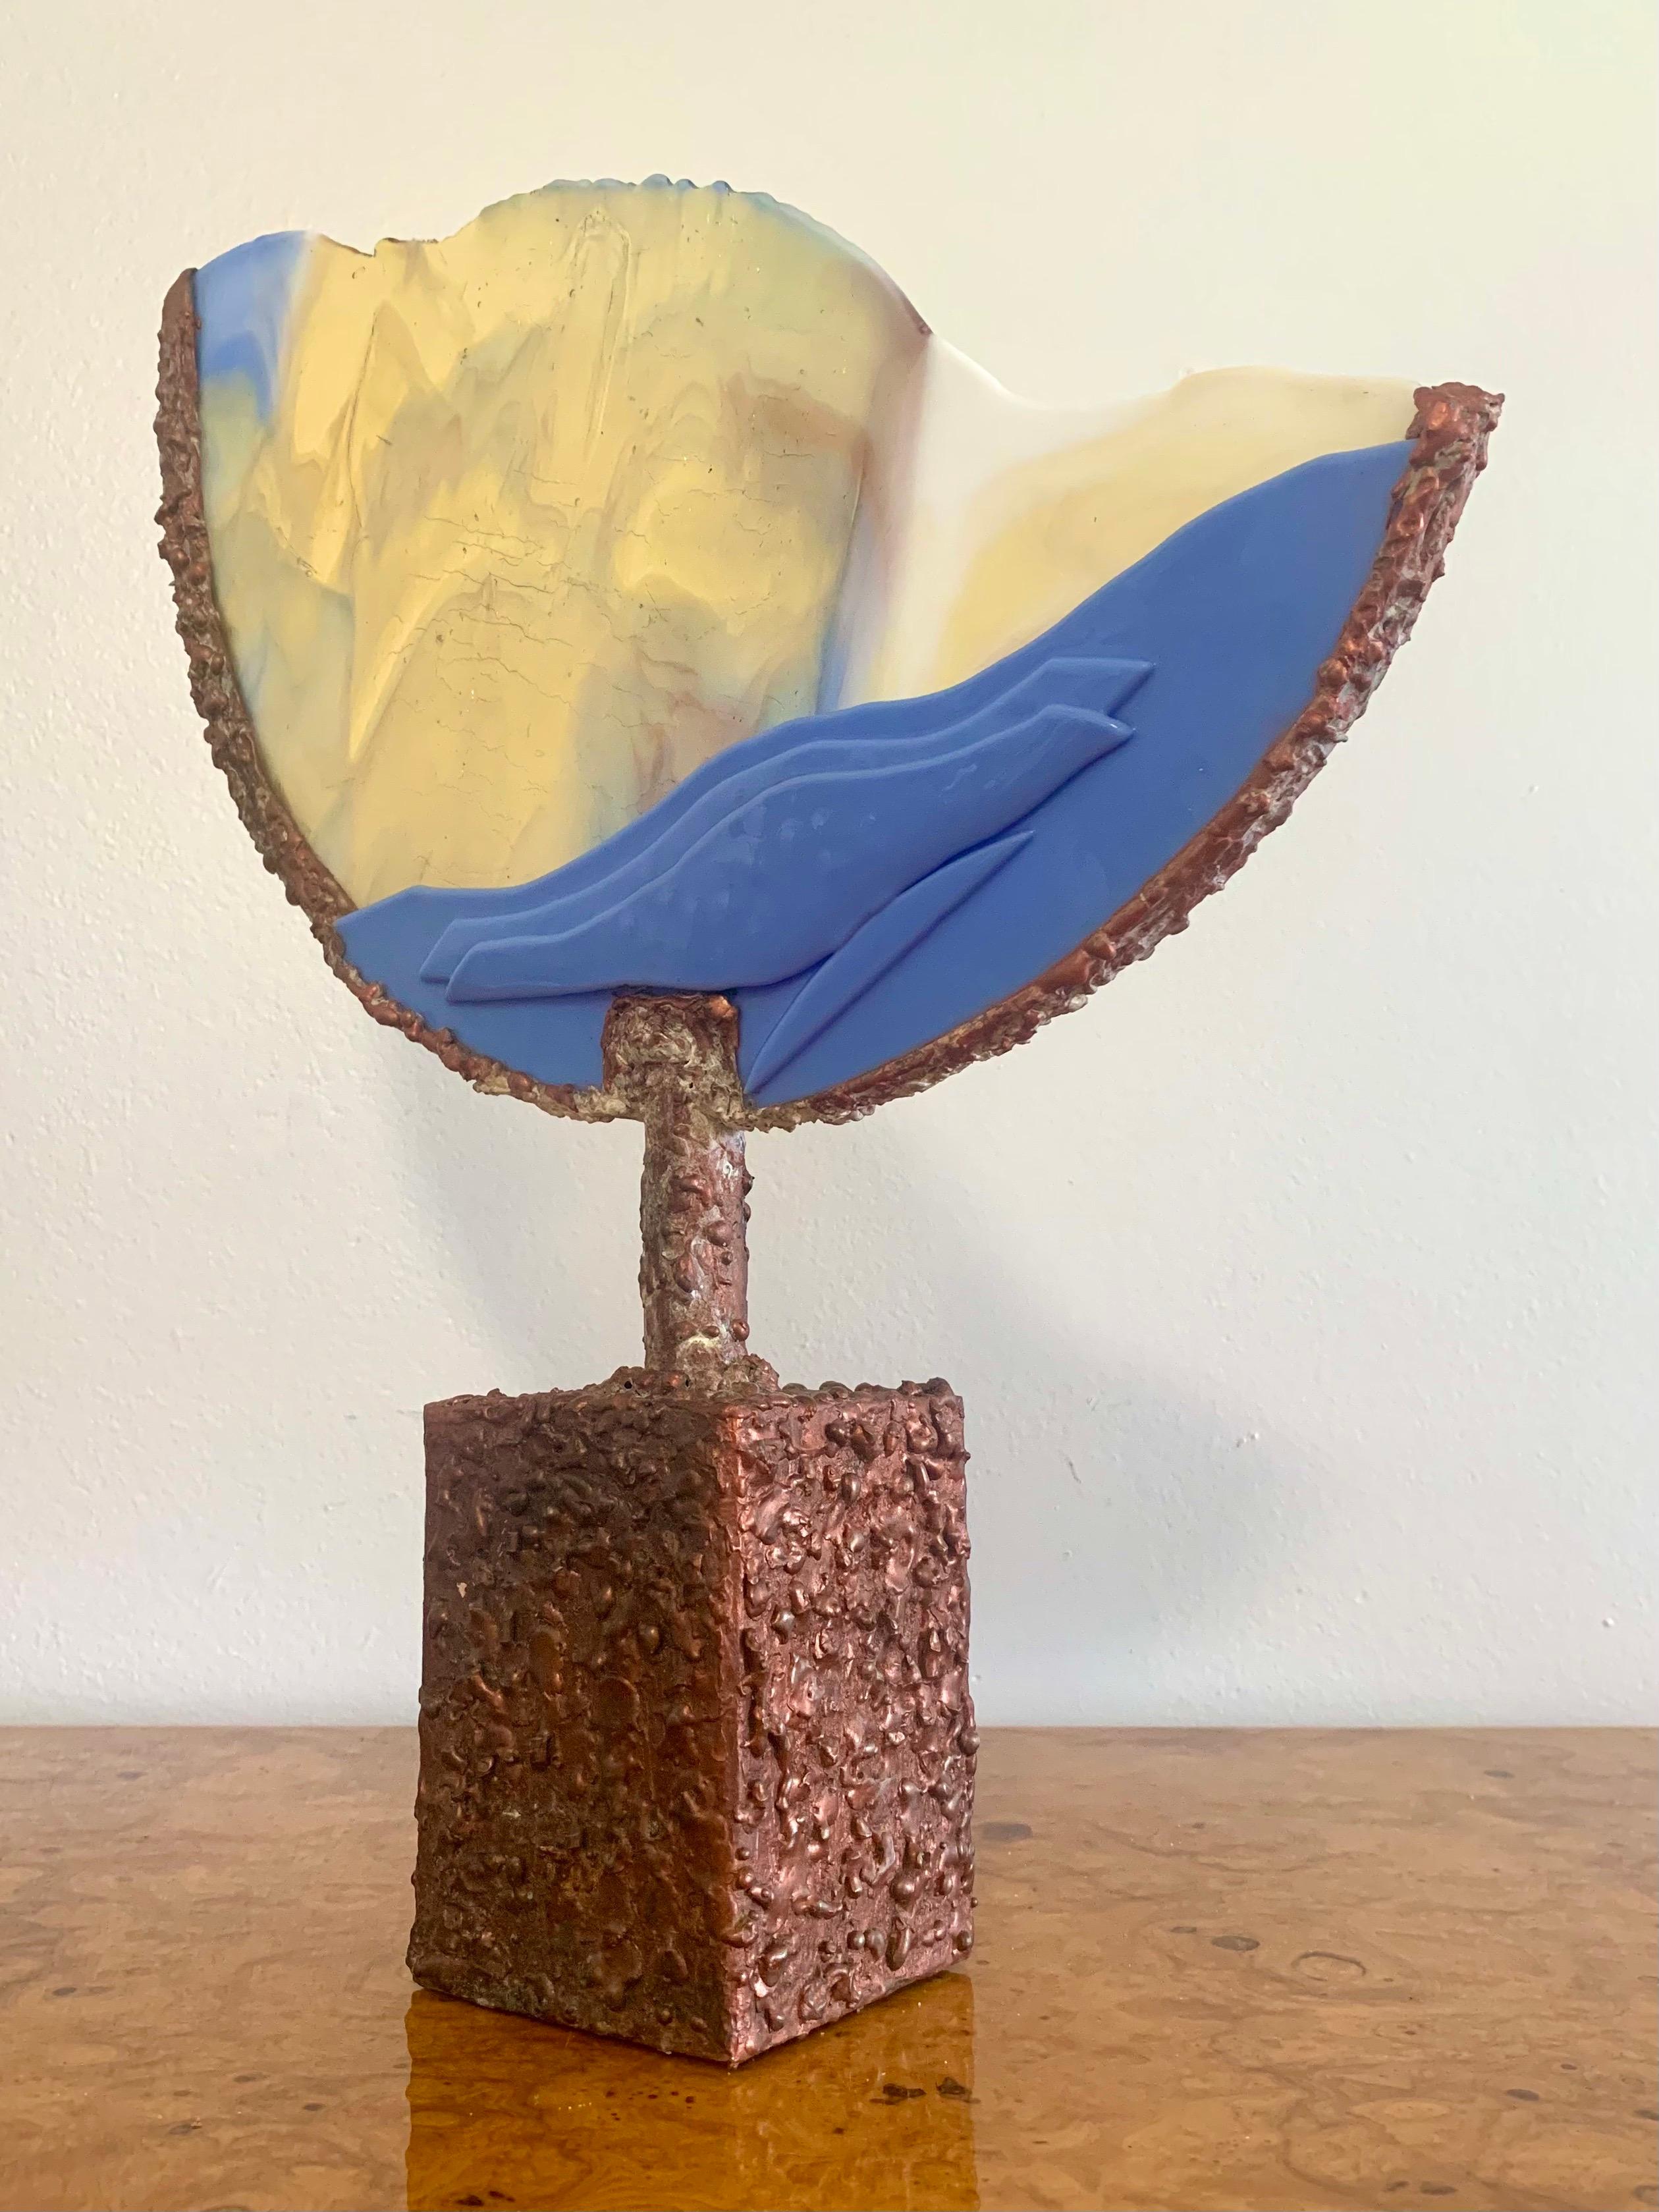 Handmade mixed media sculpture. Done in a mid century brutalist style. Phenomenal mix of textures between the welded metals and smooth glass. Gorgeous array of colors in the glass piece. Small split in the backside near the base.